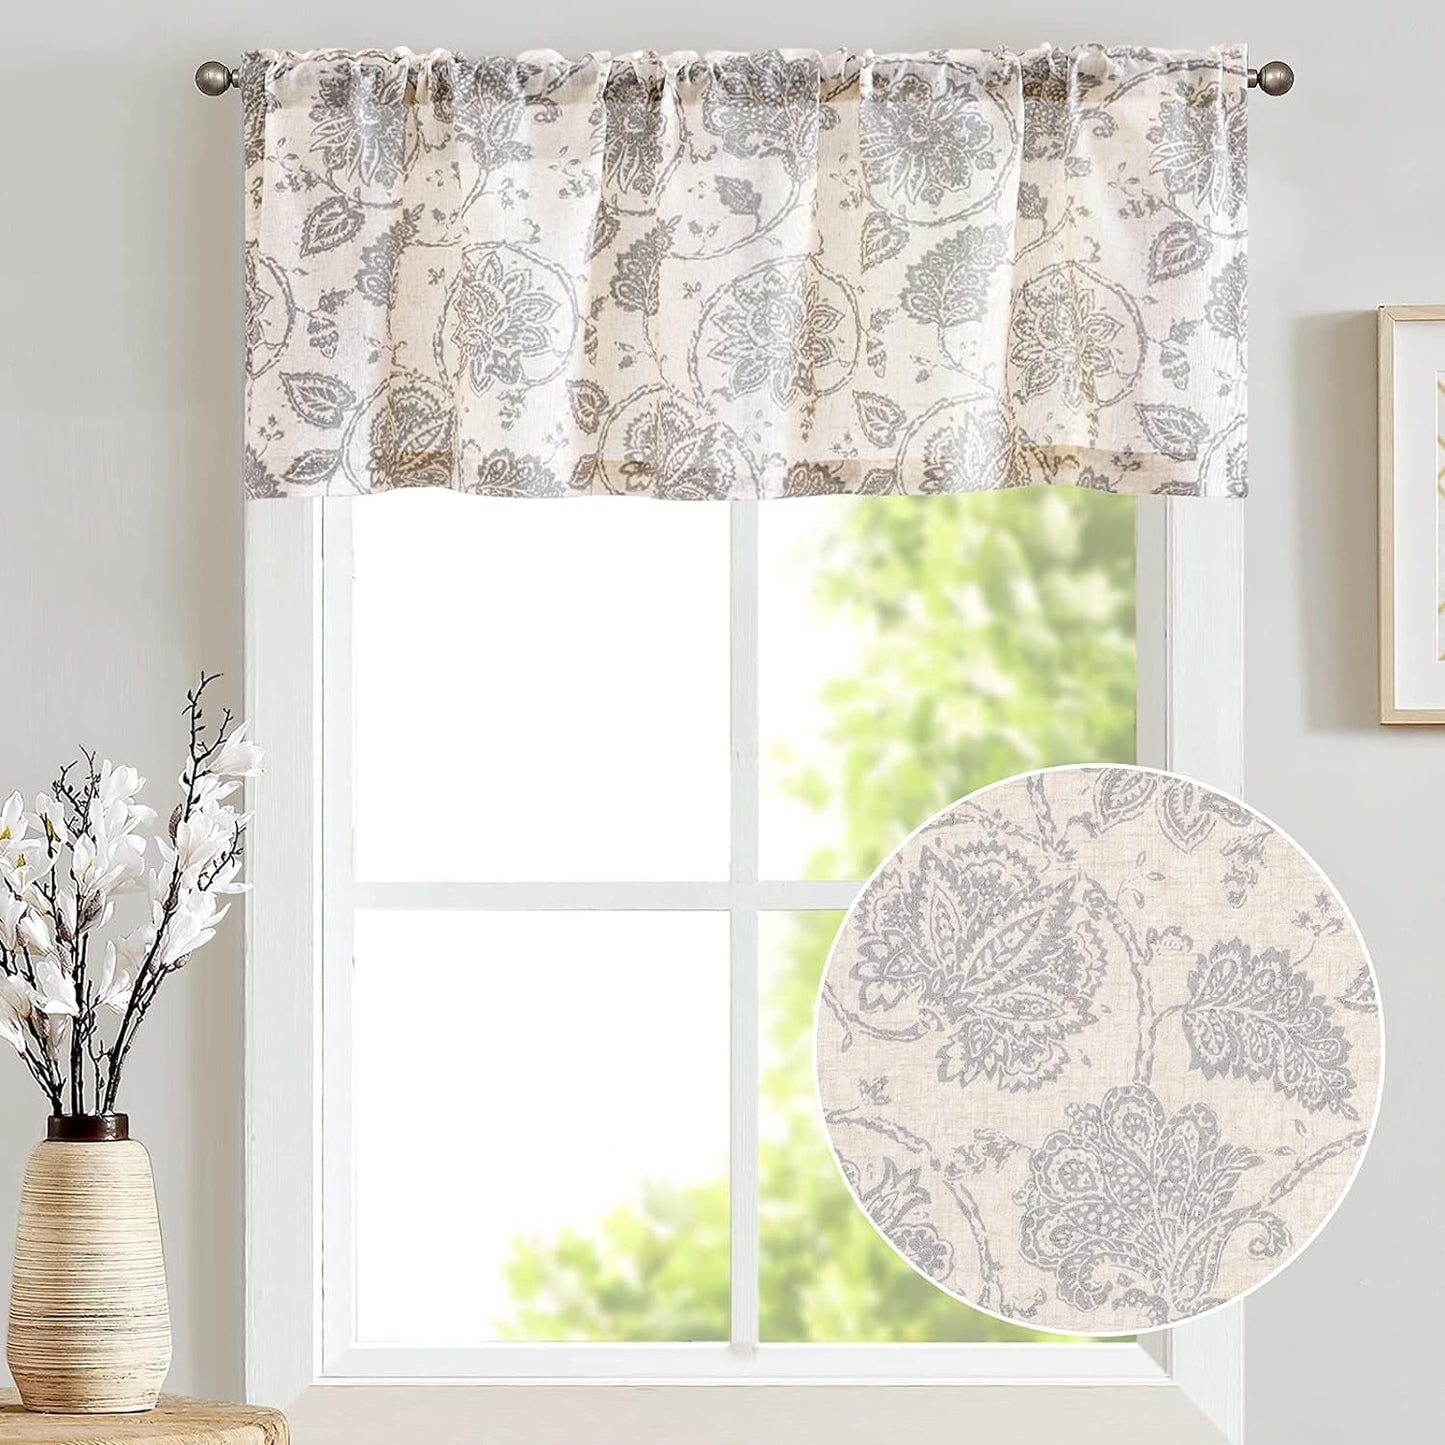 Jinchan Floral Valance for Windows Kitchen Valance Window Treatment Scroll Valance Curtain Paisley Small Window Curtain Farmhouse Country Window Valance 1 Panel Rod Pocket 18 Inches Grey on Beige